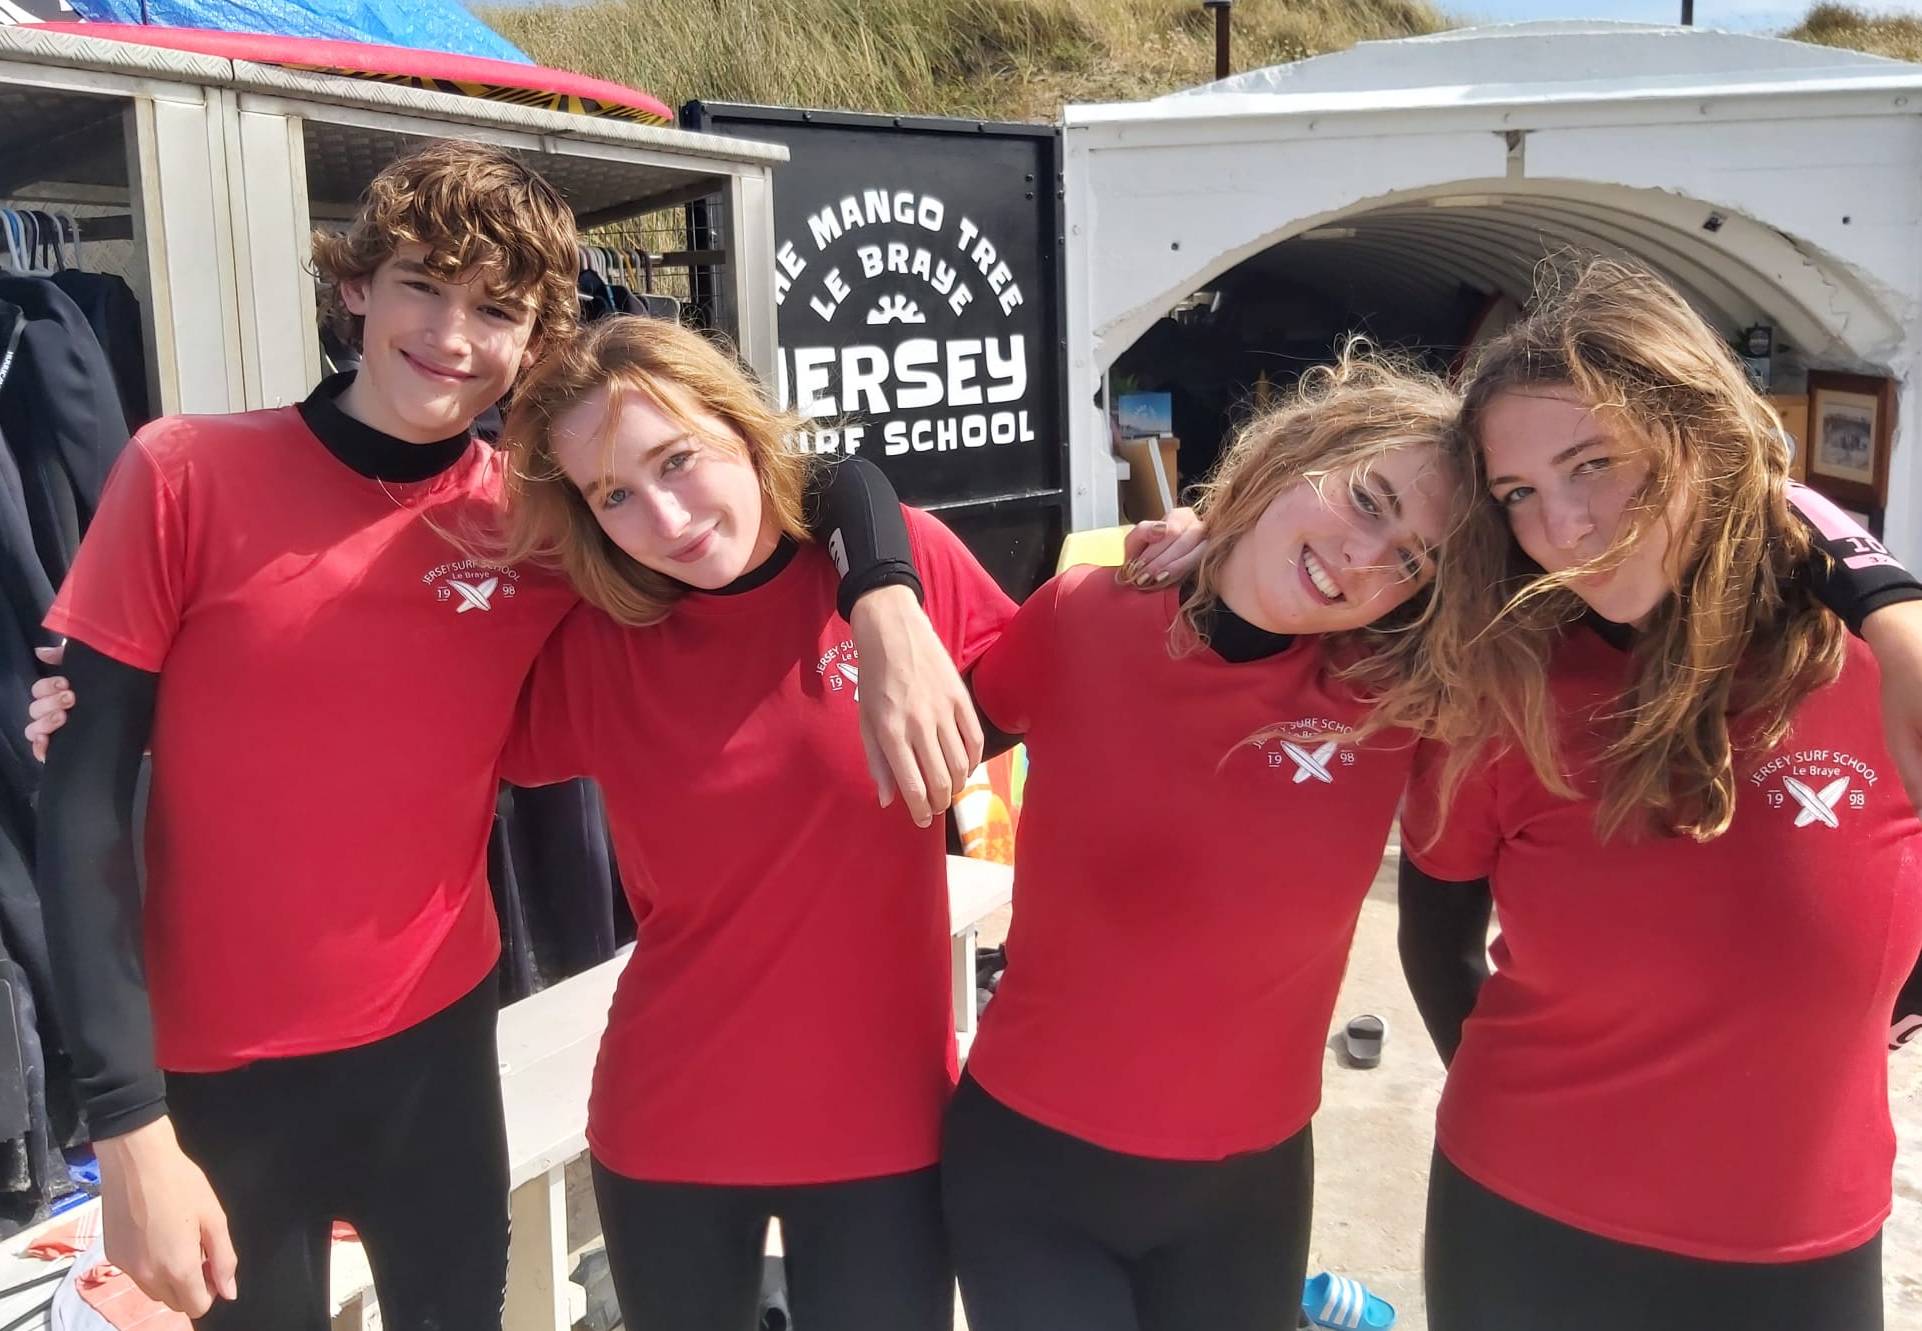 Louise’s kids at Jersey Surf School